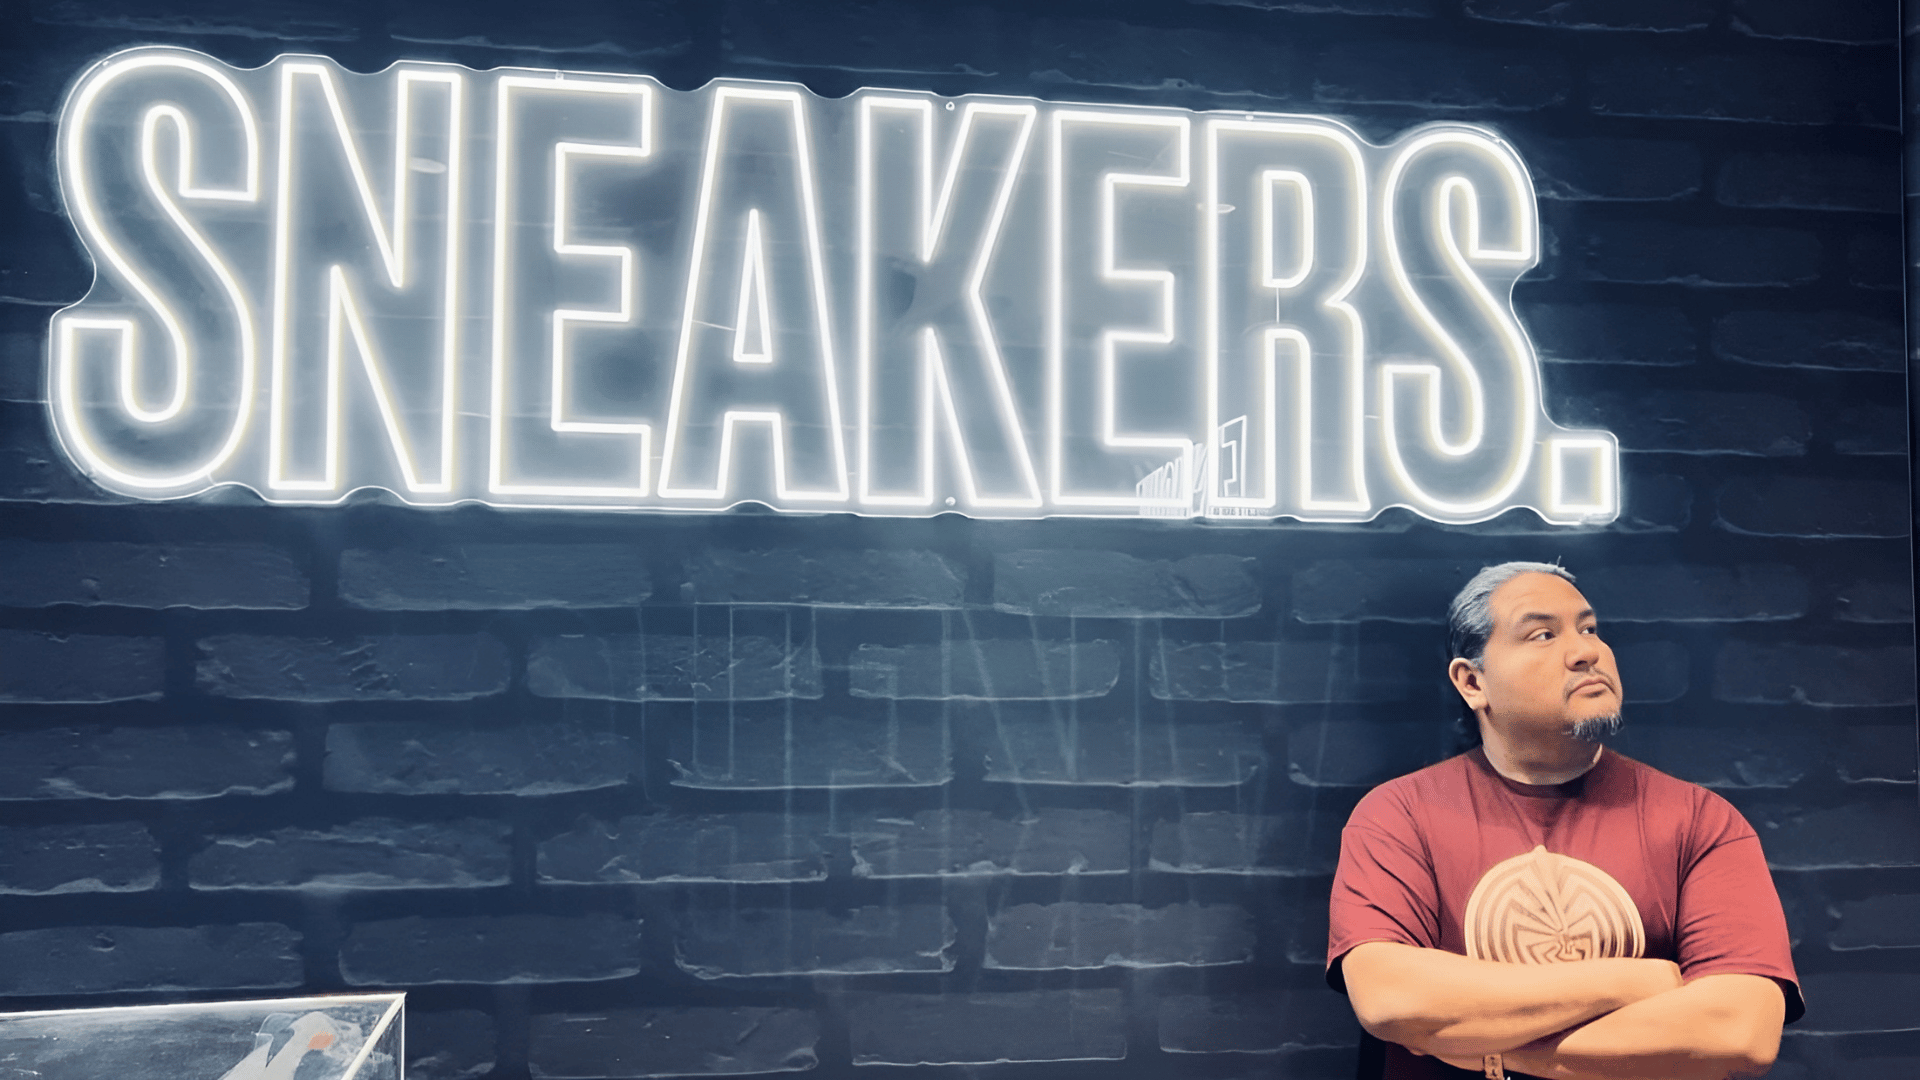 A person in a red t-shirt stands with arms crossed in front of a dark brick wall with a large, illuminated "SNEAKERS." sign.